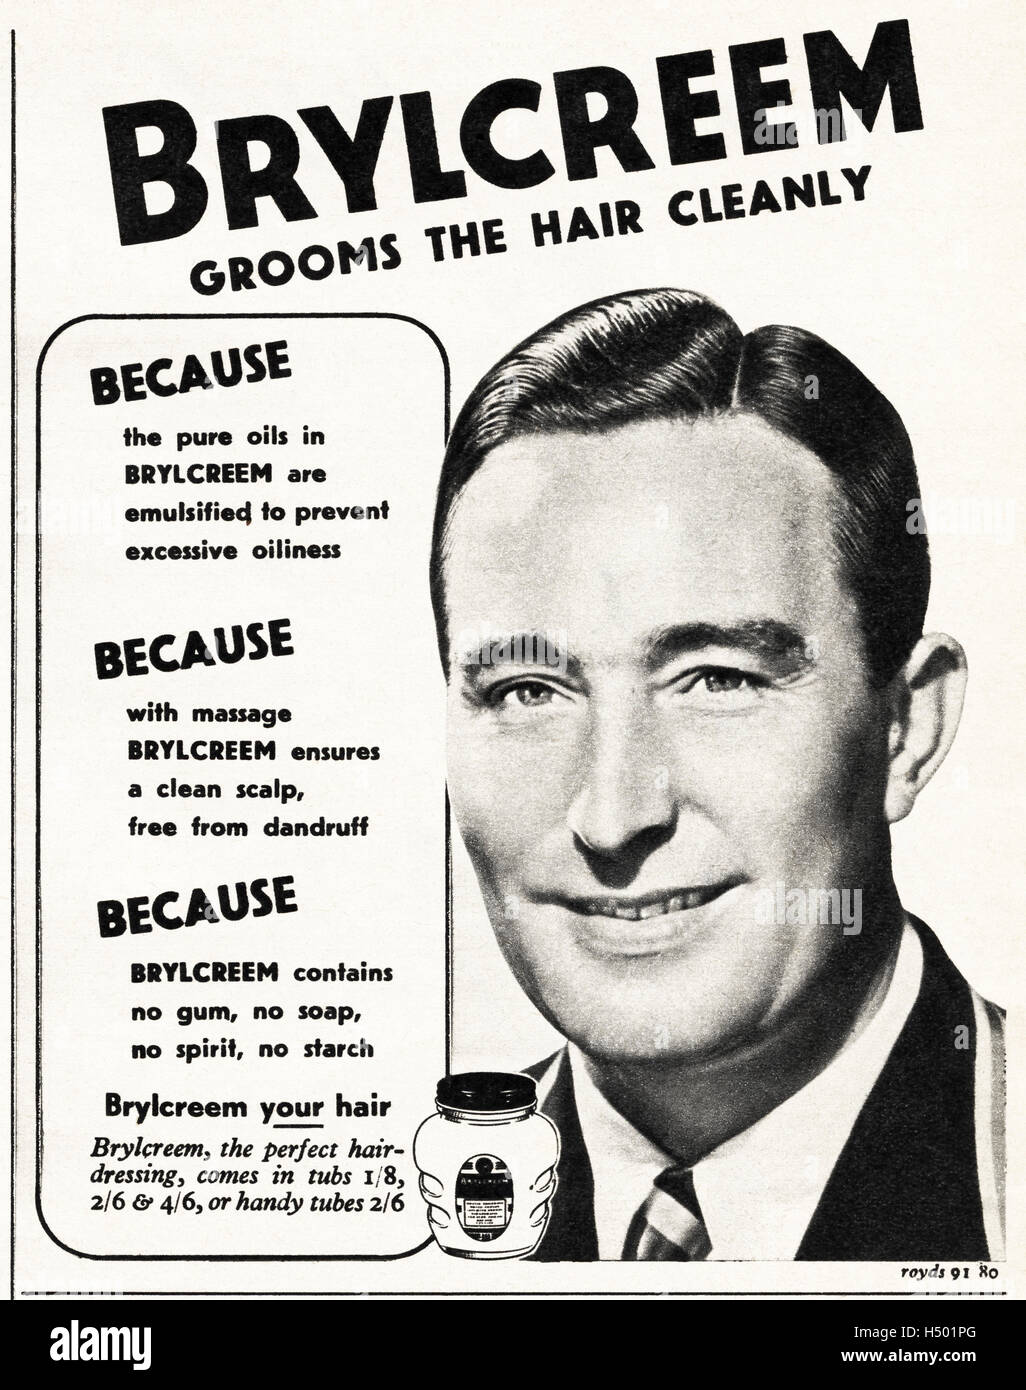 1950s advertising advert from original old vintage magazine dated 1952 retro advertisement for Brylcreem for hair grooming Stock Photo